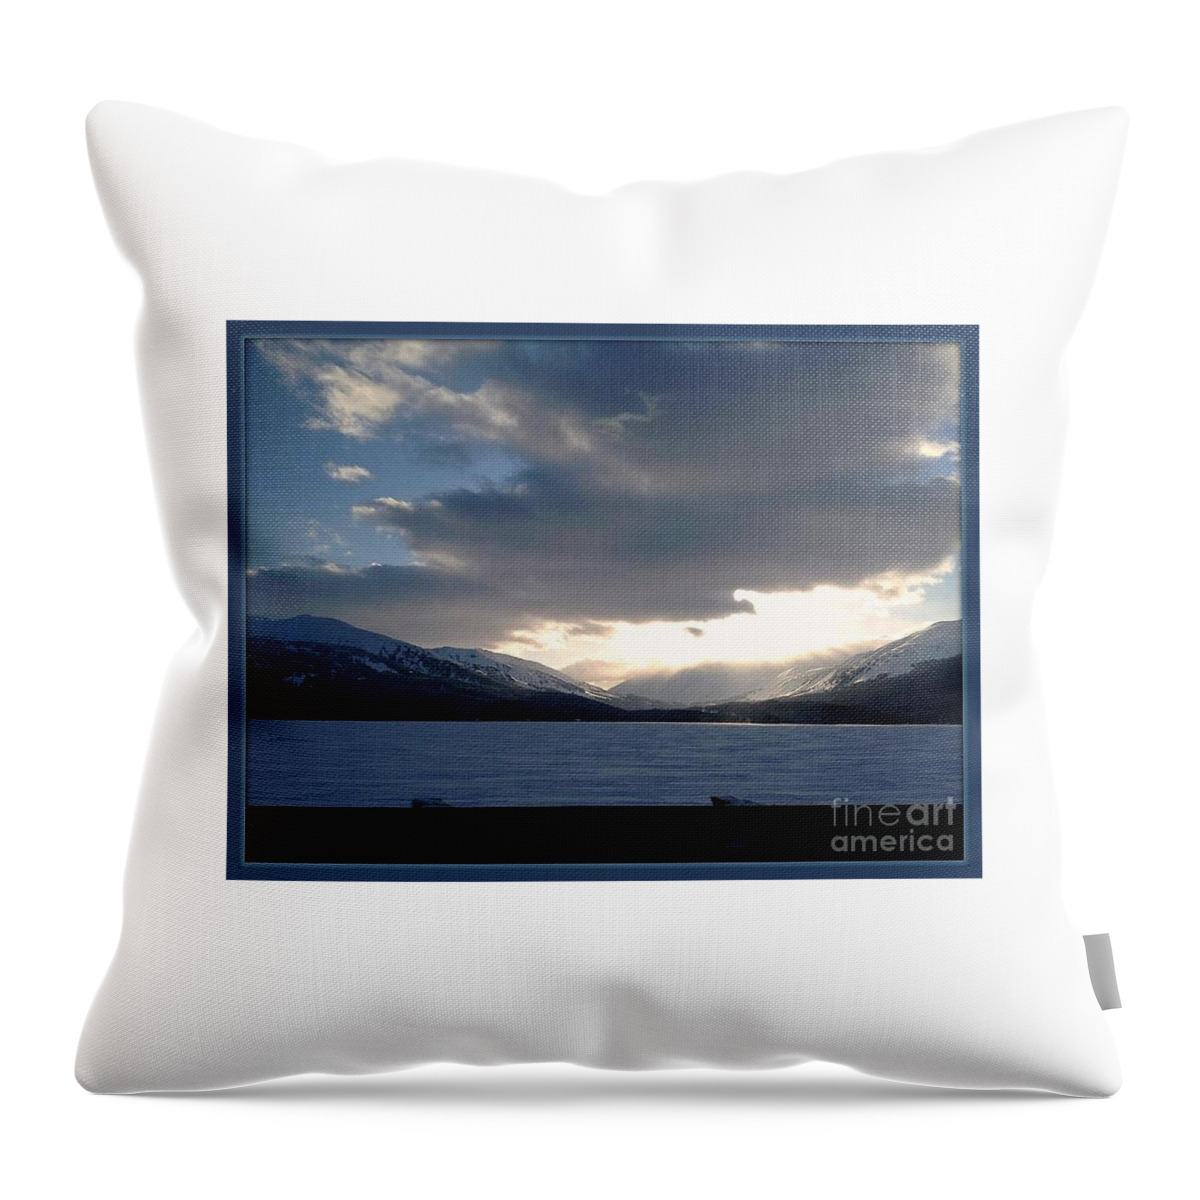  Throw Pillow featuring the photograph McKinley by James Lanigan Thompson MFA